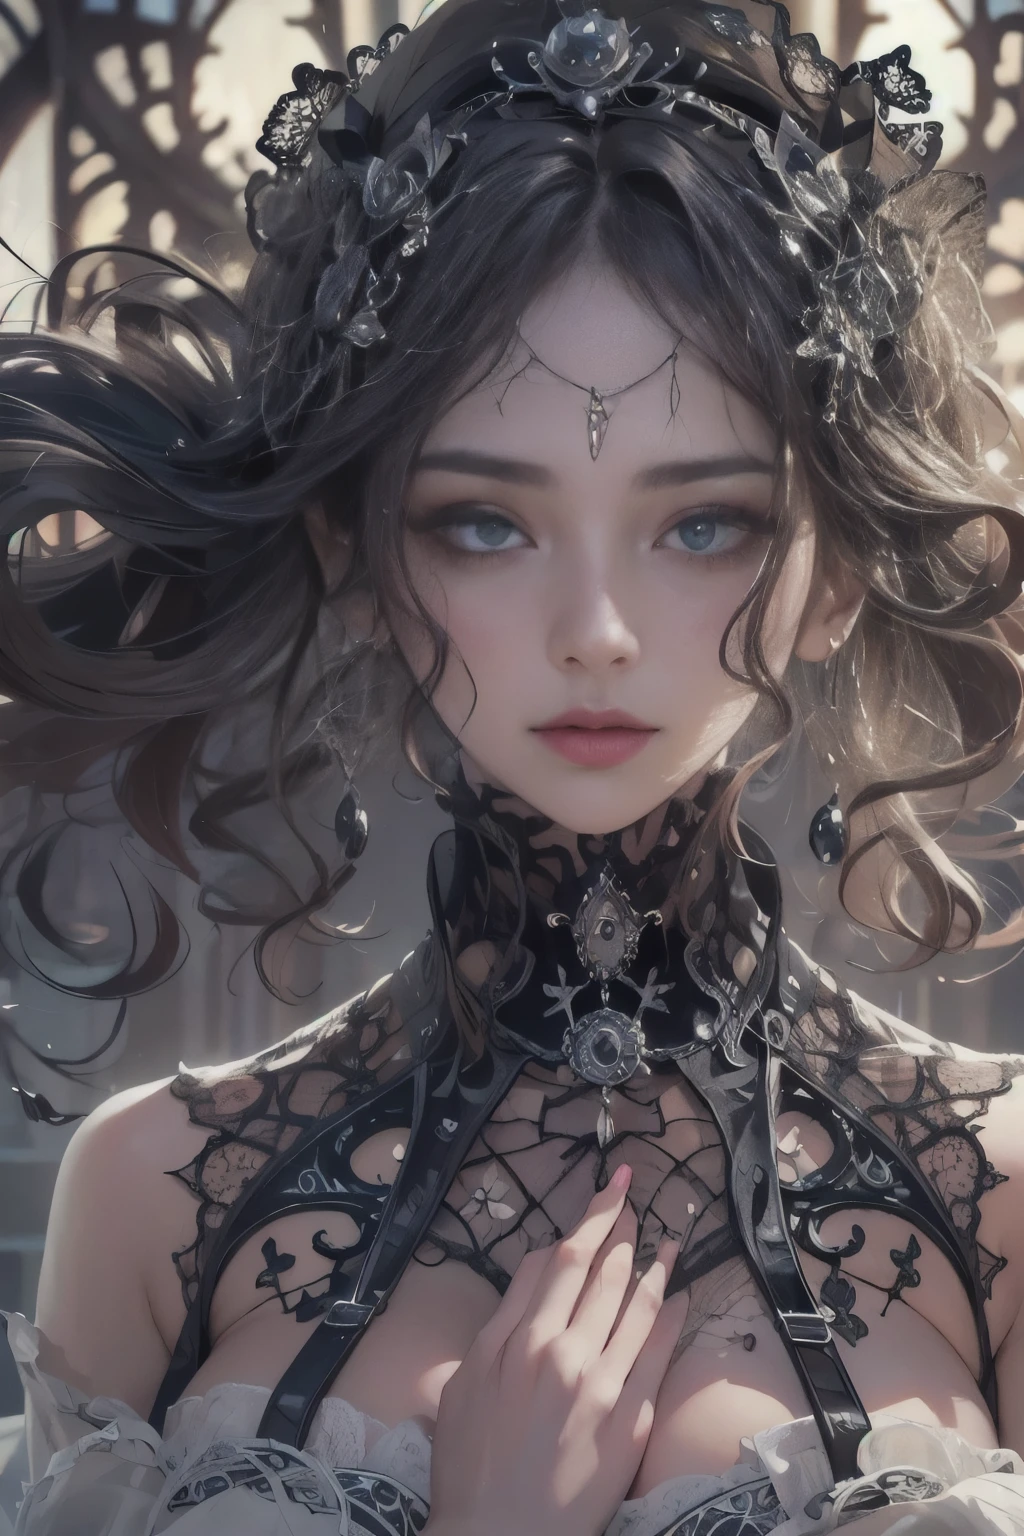 Official Art, Unity 8k wallpaper, super detailed, beautiful, beautiful, masterpiece, best quality, darkness, atmosphere, mystery, romanticism, creepy, literature, art, fashion, victorian, decoration, intricacies, ironwork, lace, contemplation, emotional depth, supernatural, 1 girl, solo, neck, bust composition, huge firm bouncing bust